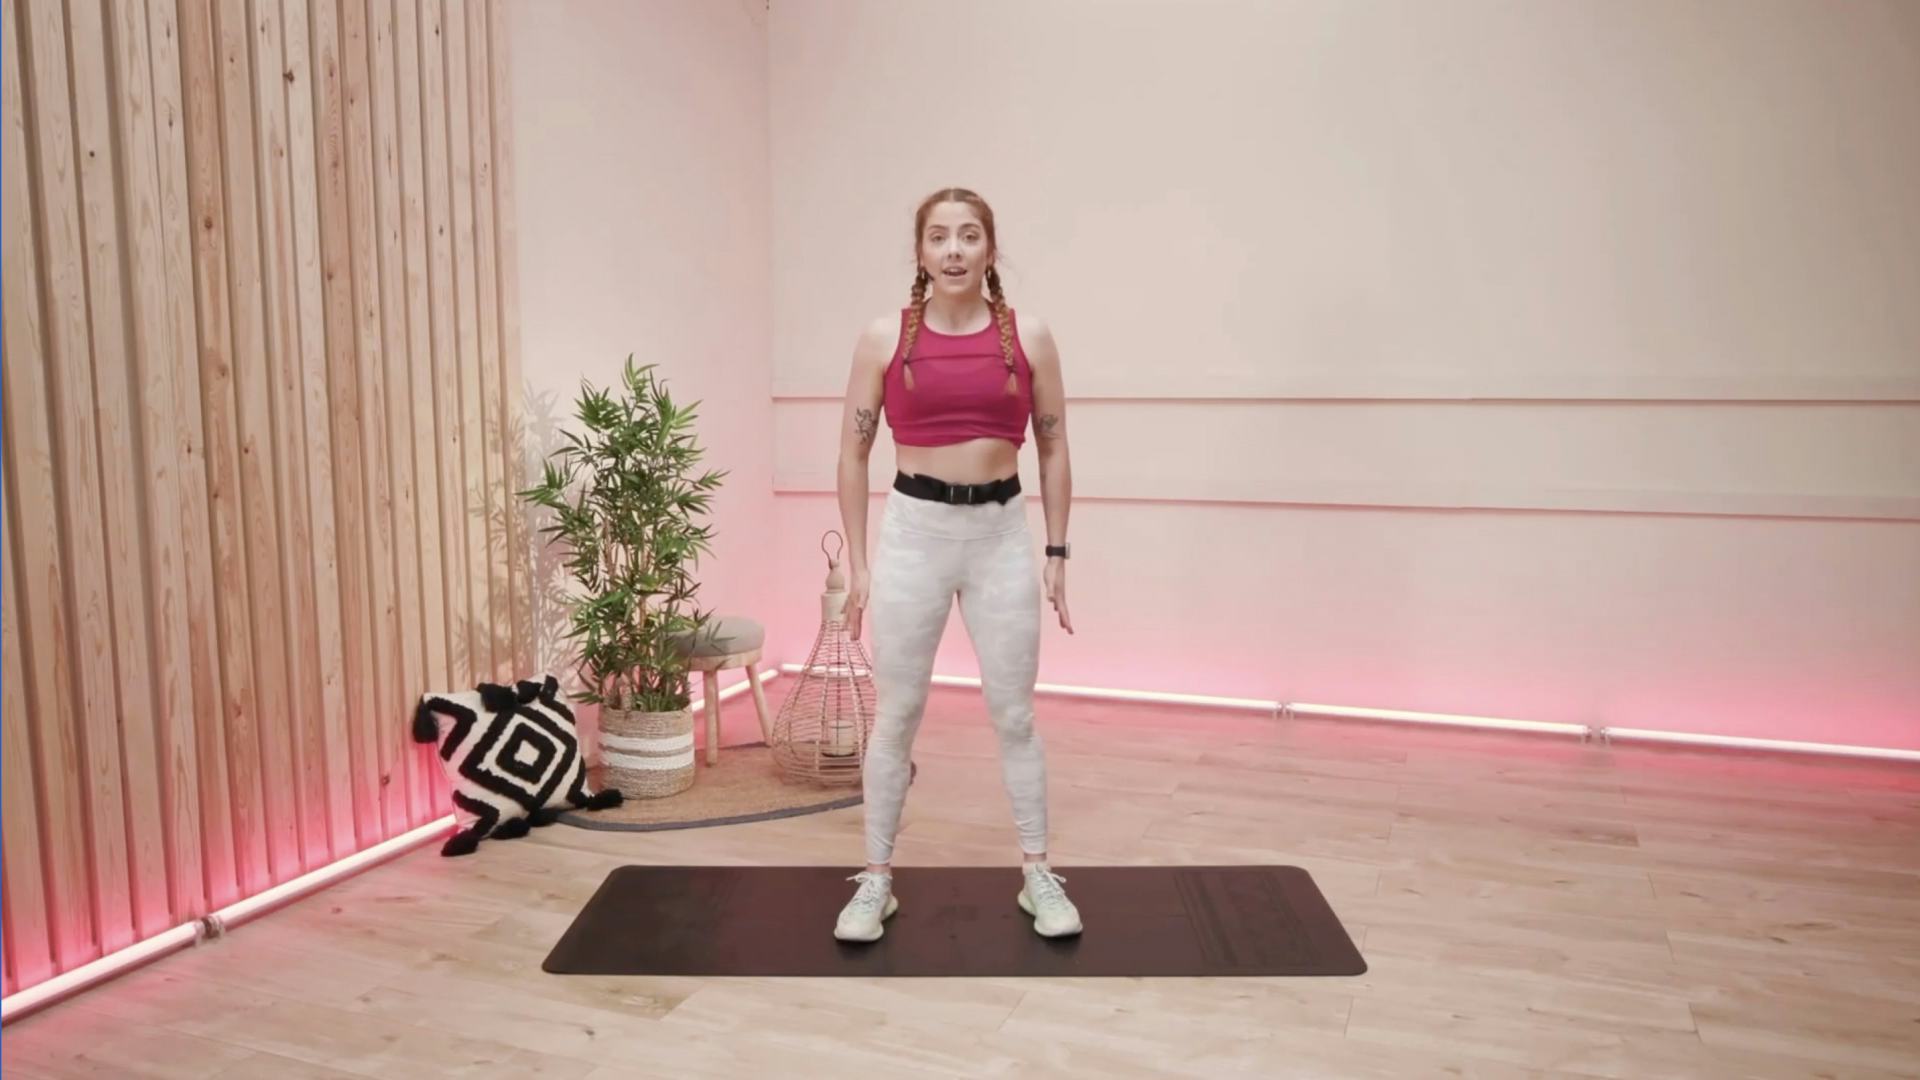 Full body low impact workout by Courtney